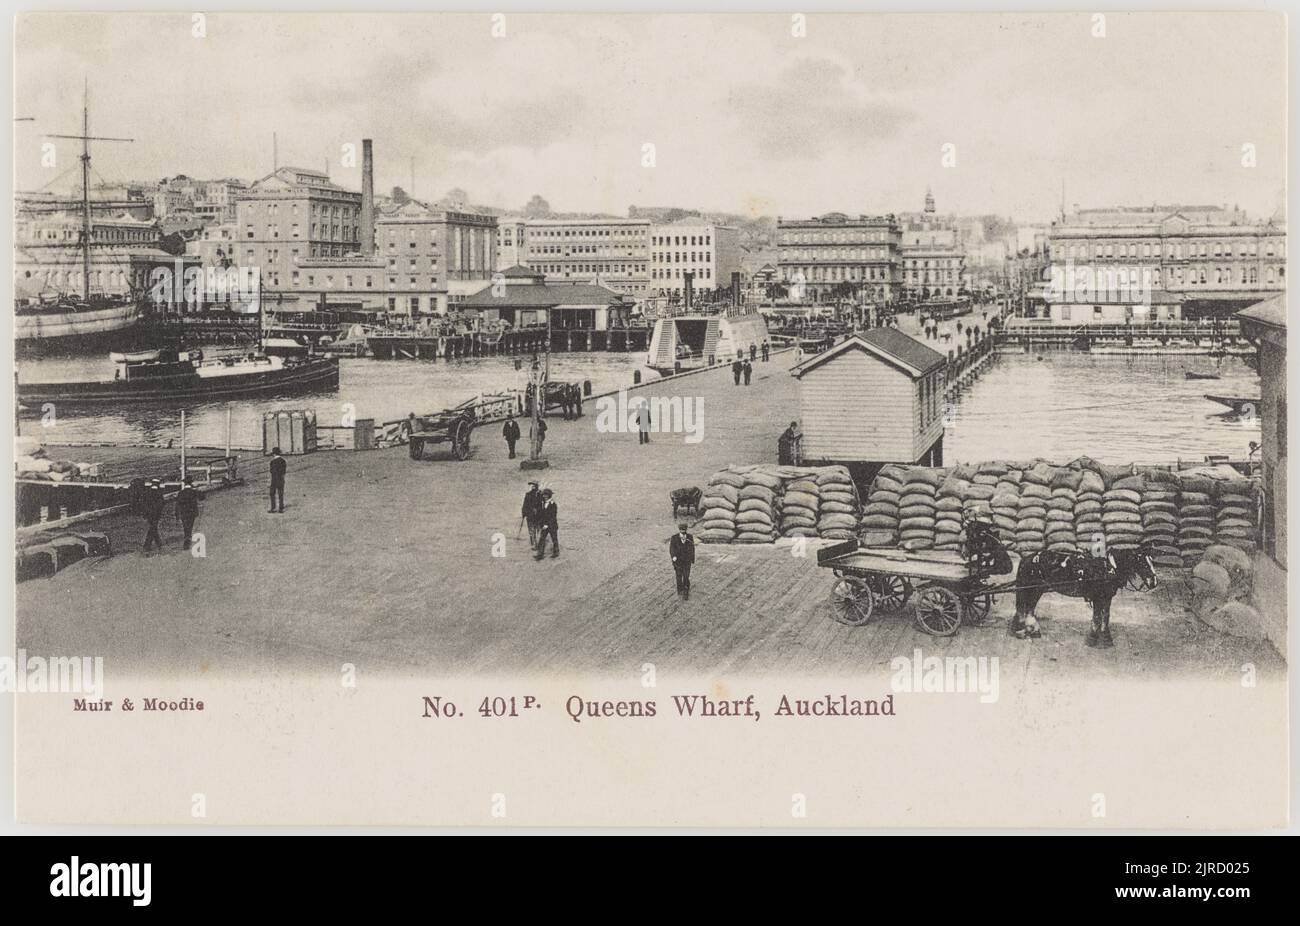 Queens Wharf, Auckland, 1905, Auckland, by Muir & Moodie. Stock Photo